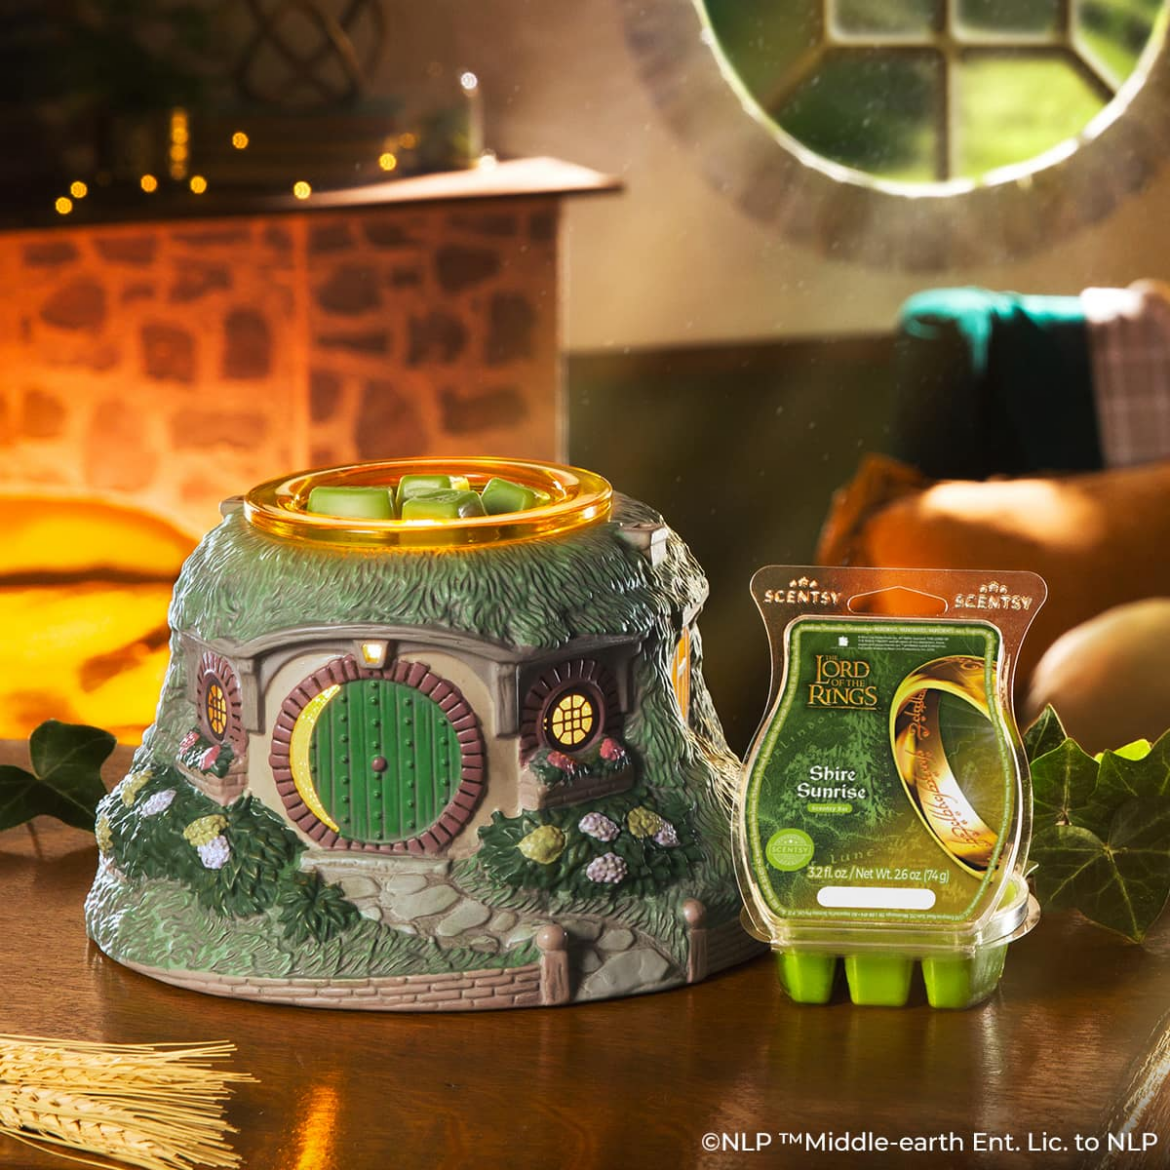 New Lord of the Rings Scentsy Collection Debuts Soon!